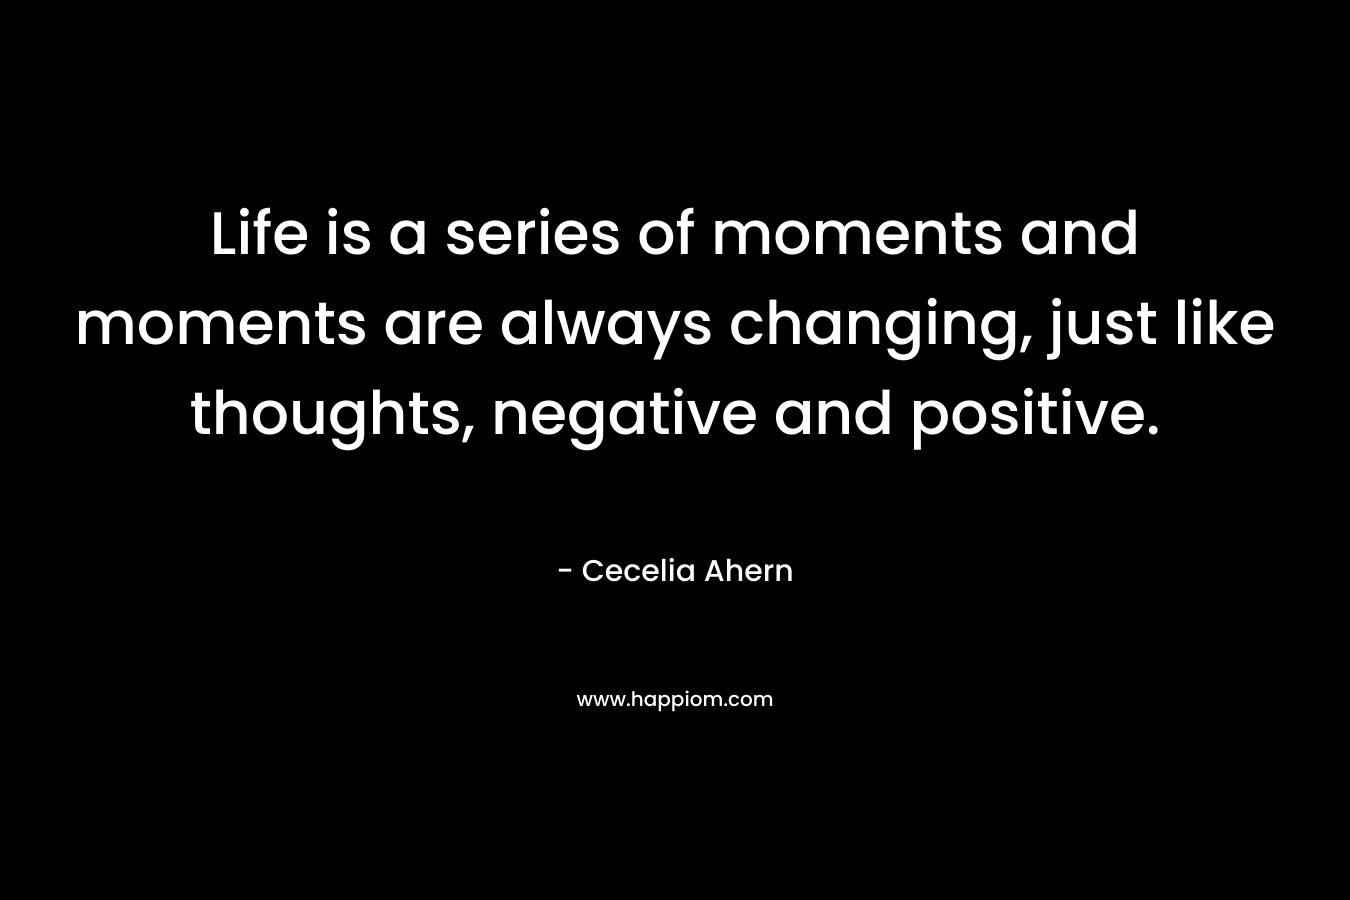 Life is a series of moments and moments are always changing, just like thoughts, negative and positive.